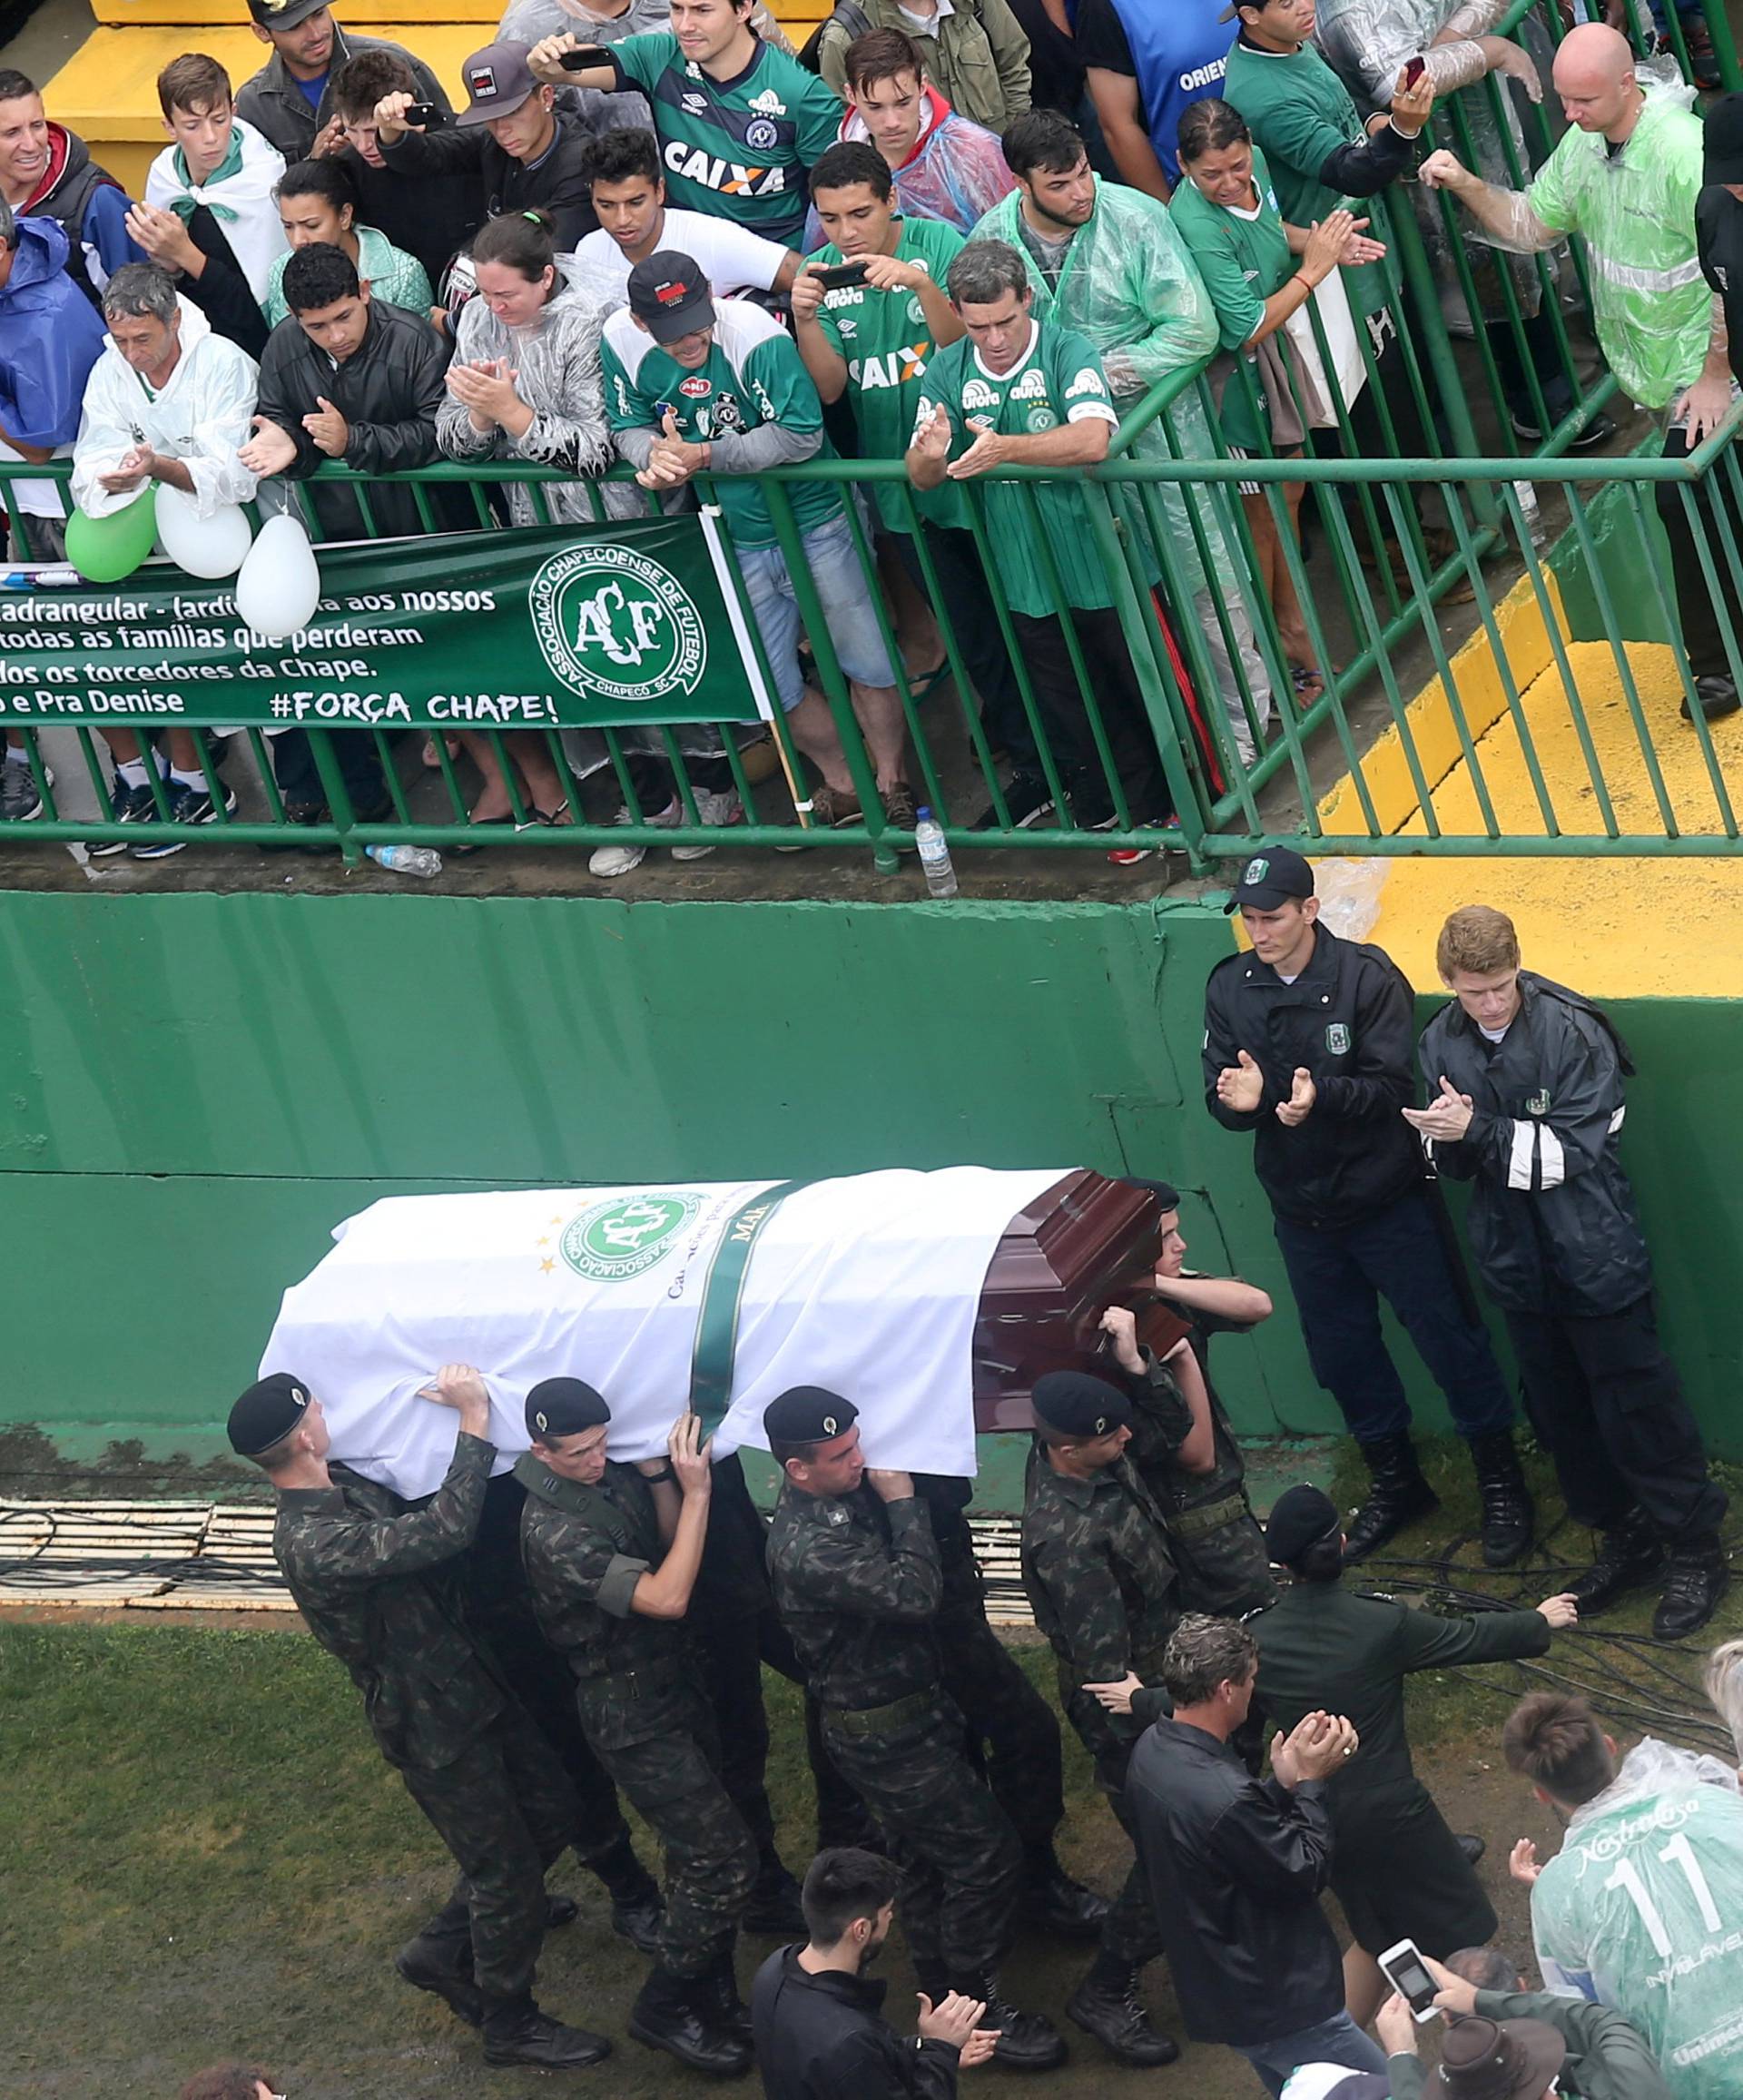 Soldiers carry out the coffin of one of the victims of the plane crash in Colombia at Arena Conda stadium during a ceremony to pay tribute to them in Chapeco